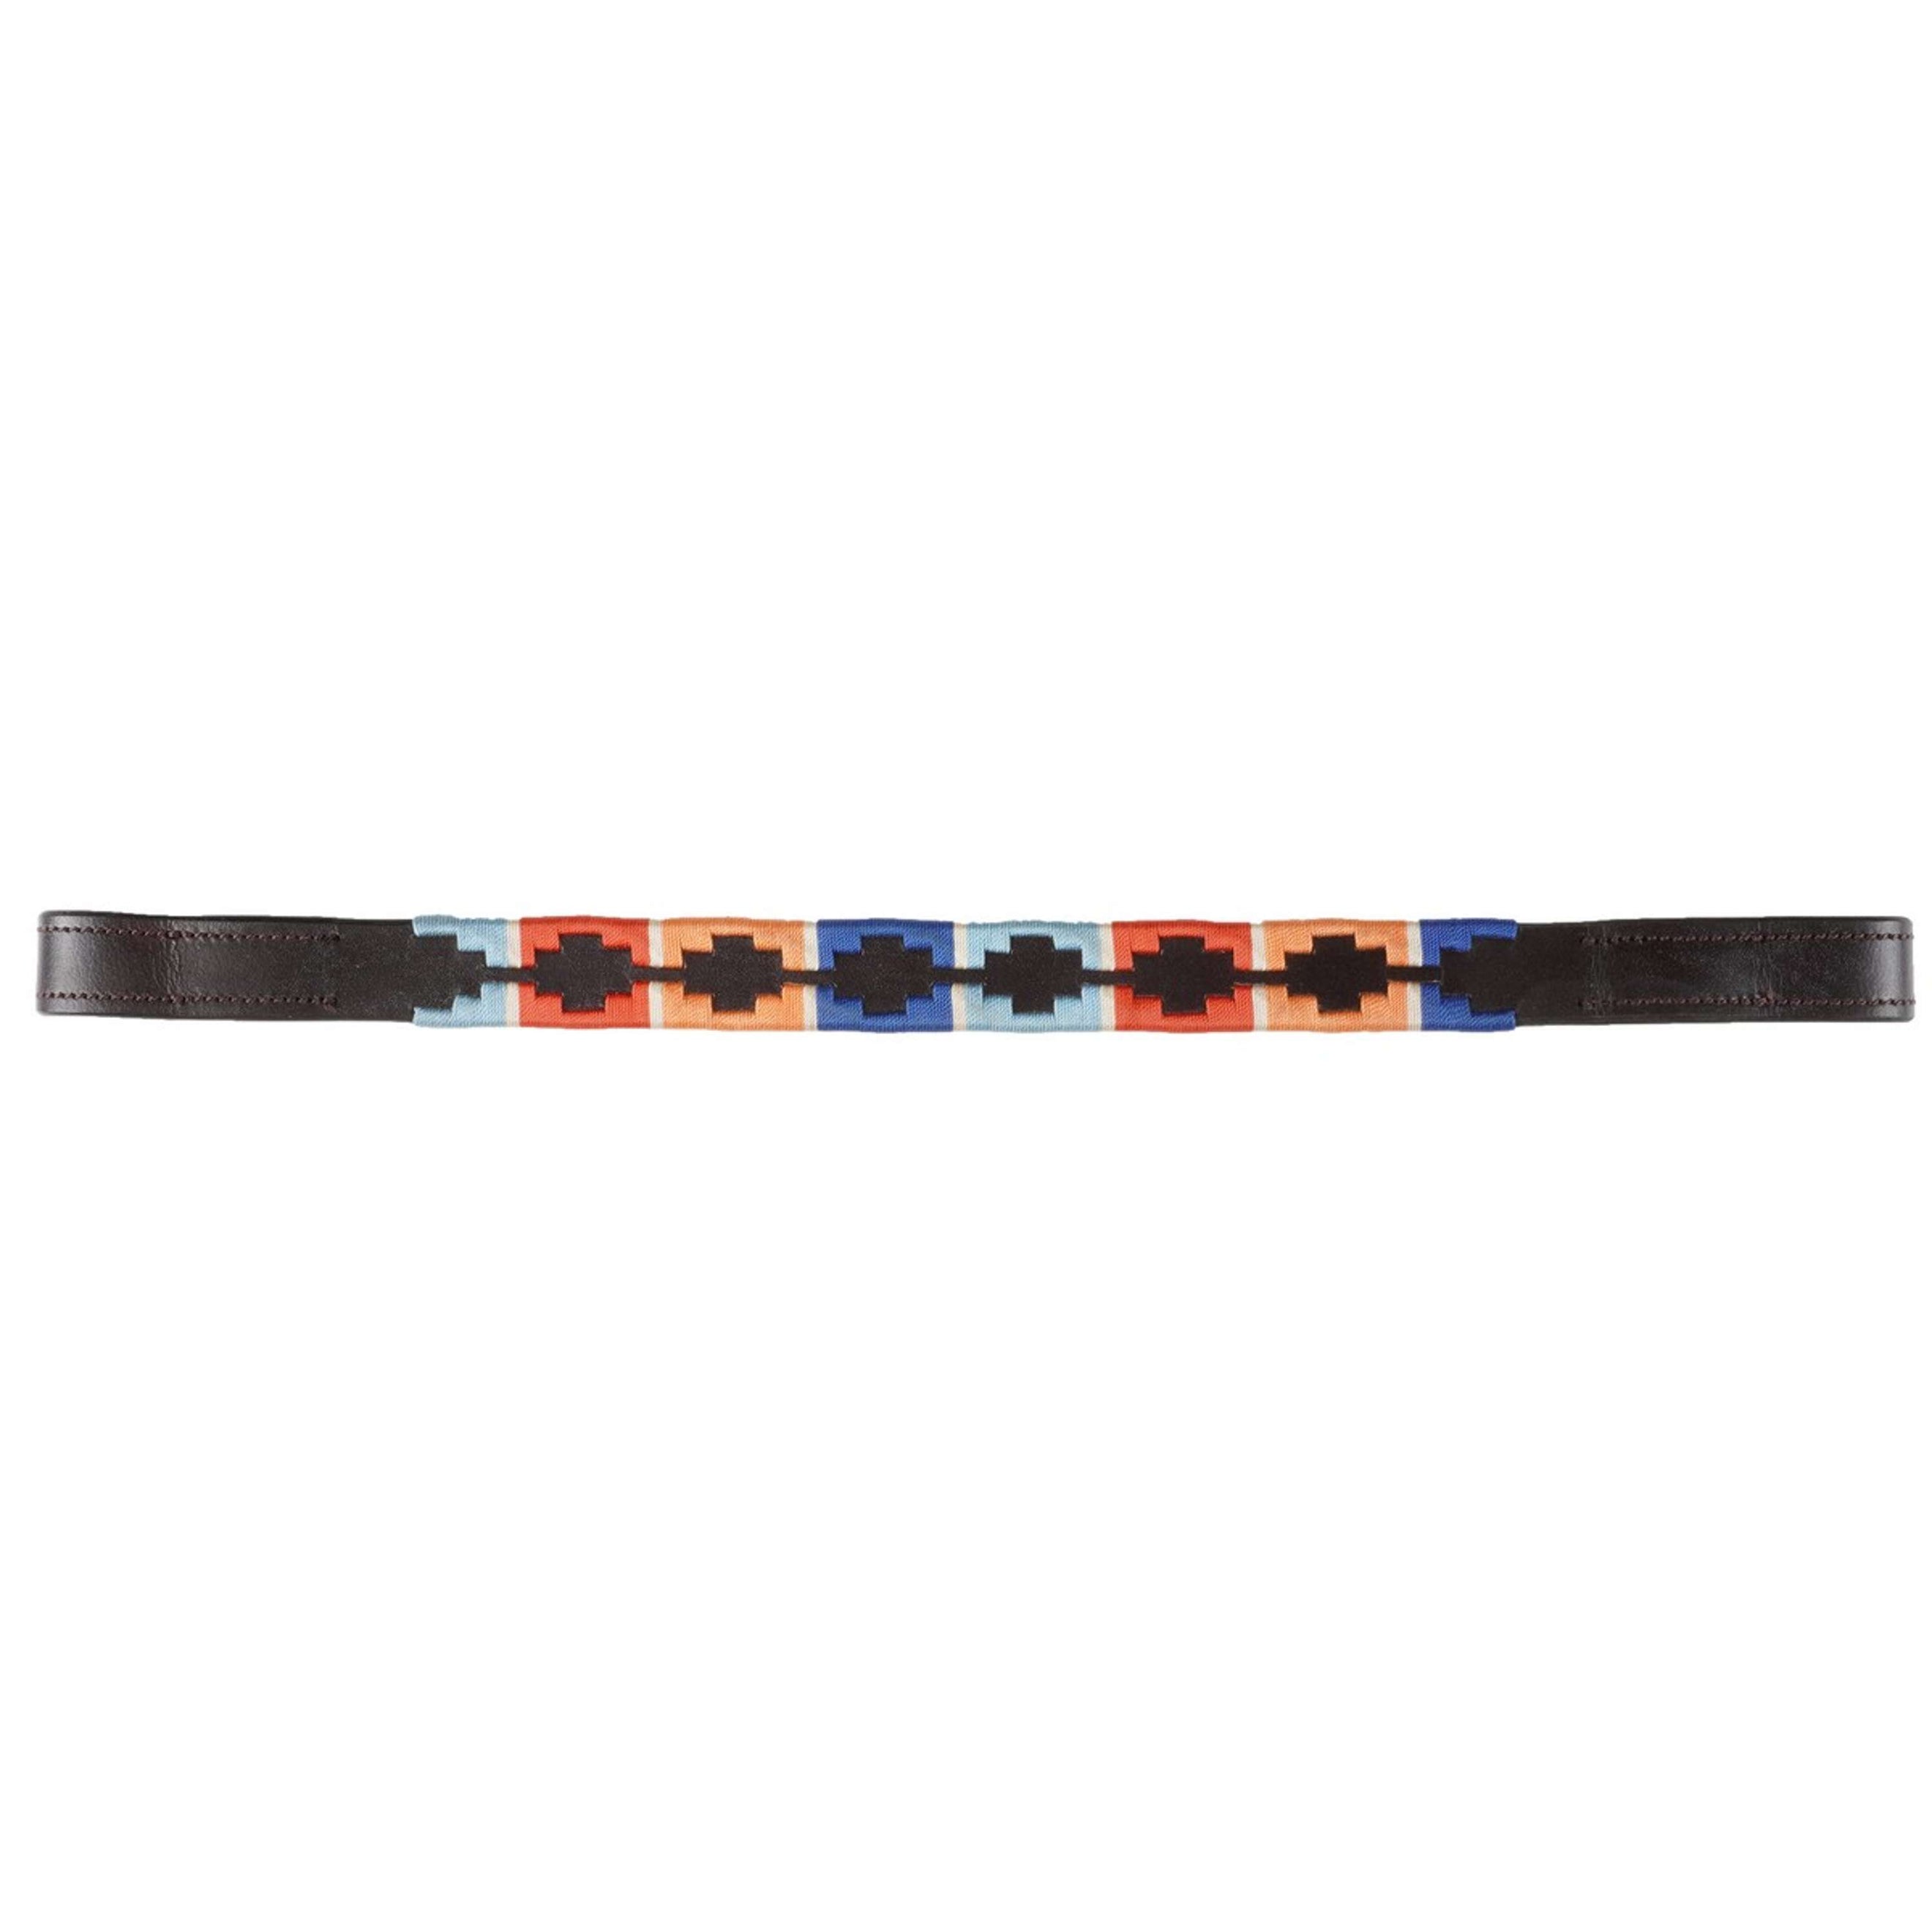 Blenheim by Shires Frontal Polo Cuir Turquoise/Rouge/Orange/Blue